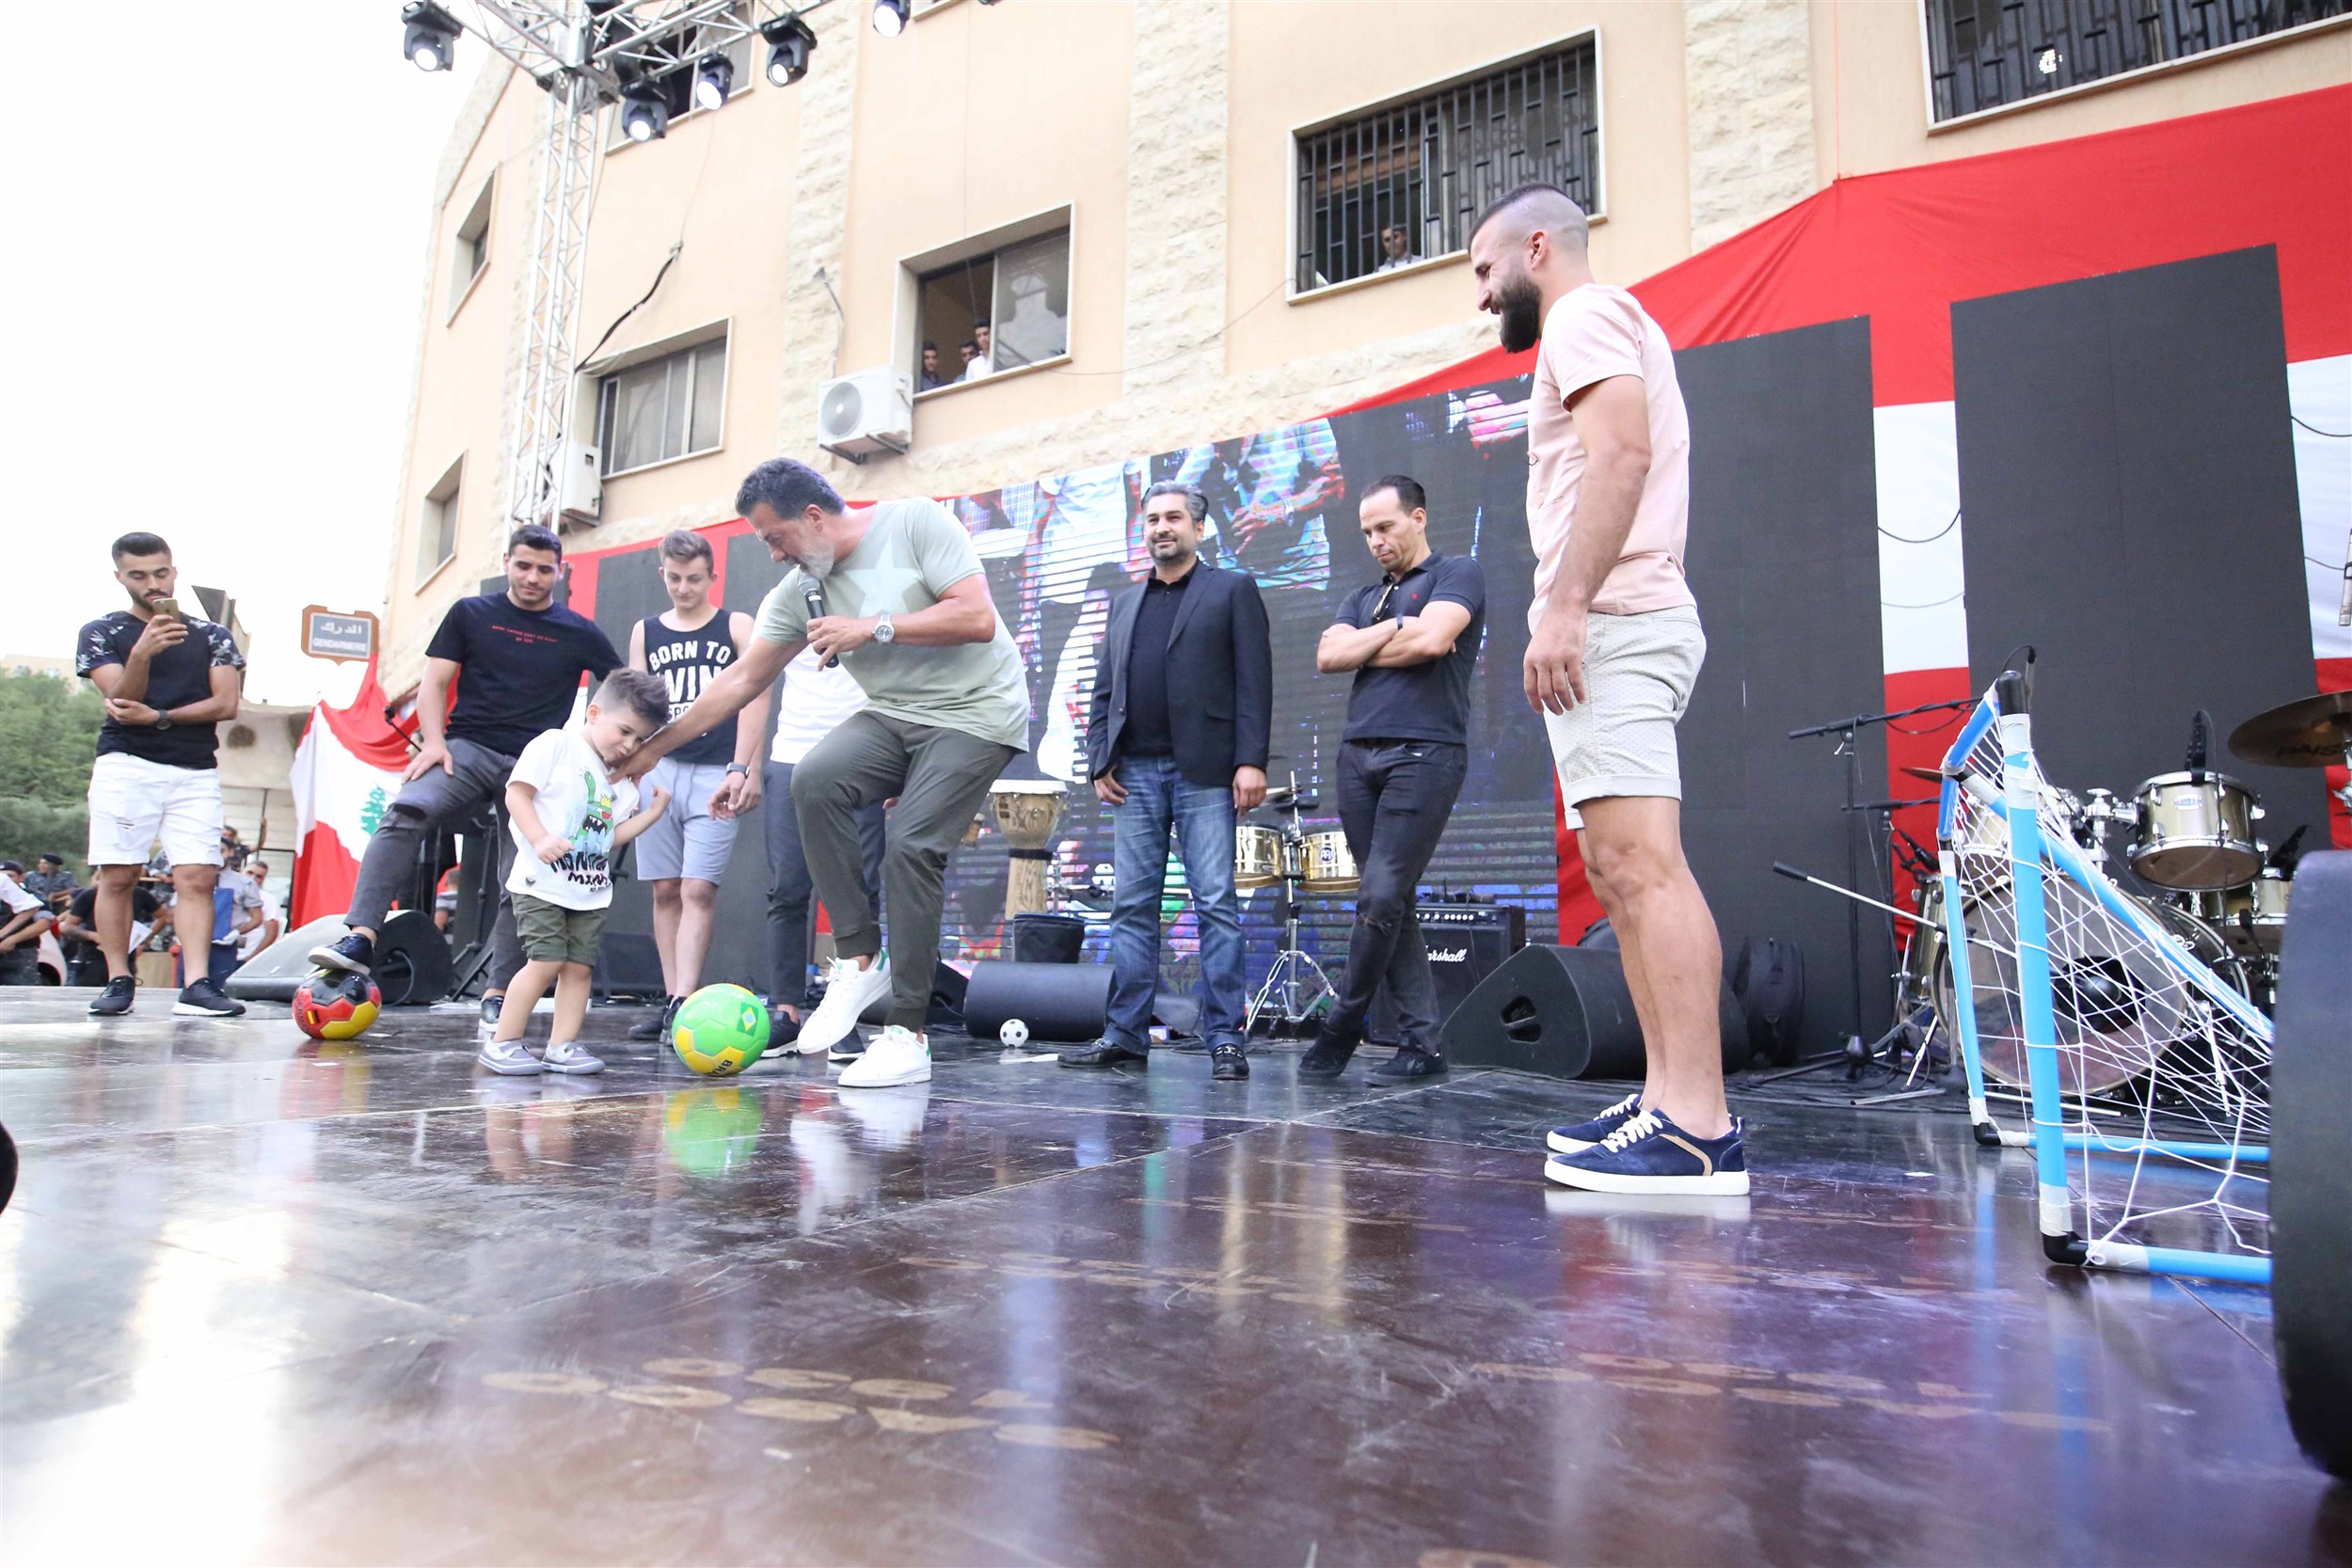 the football team “el nejmeh” and host tony baroud enjoying a friendly game with the audience.